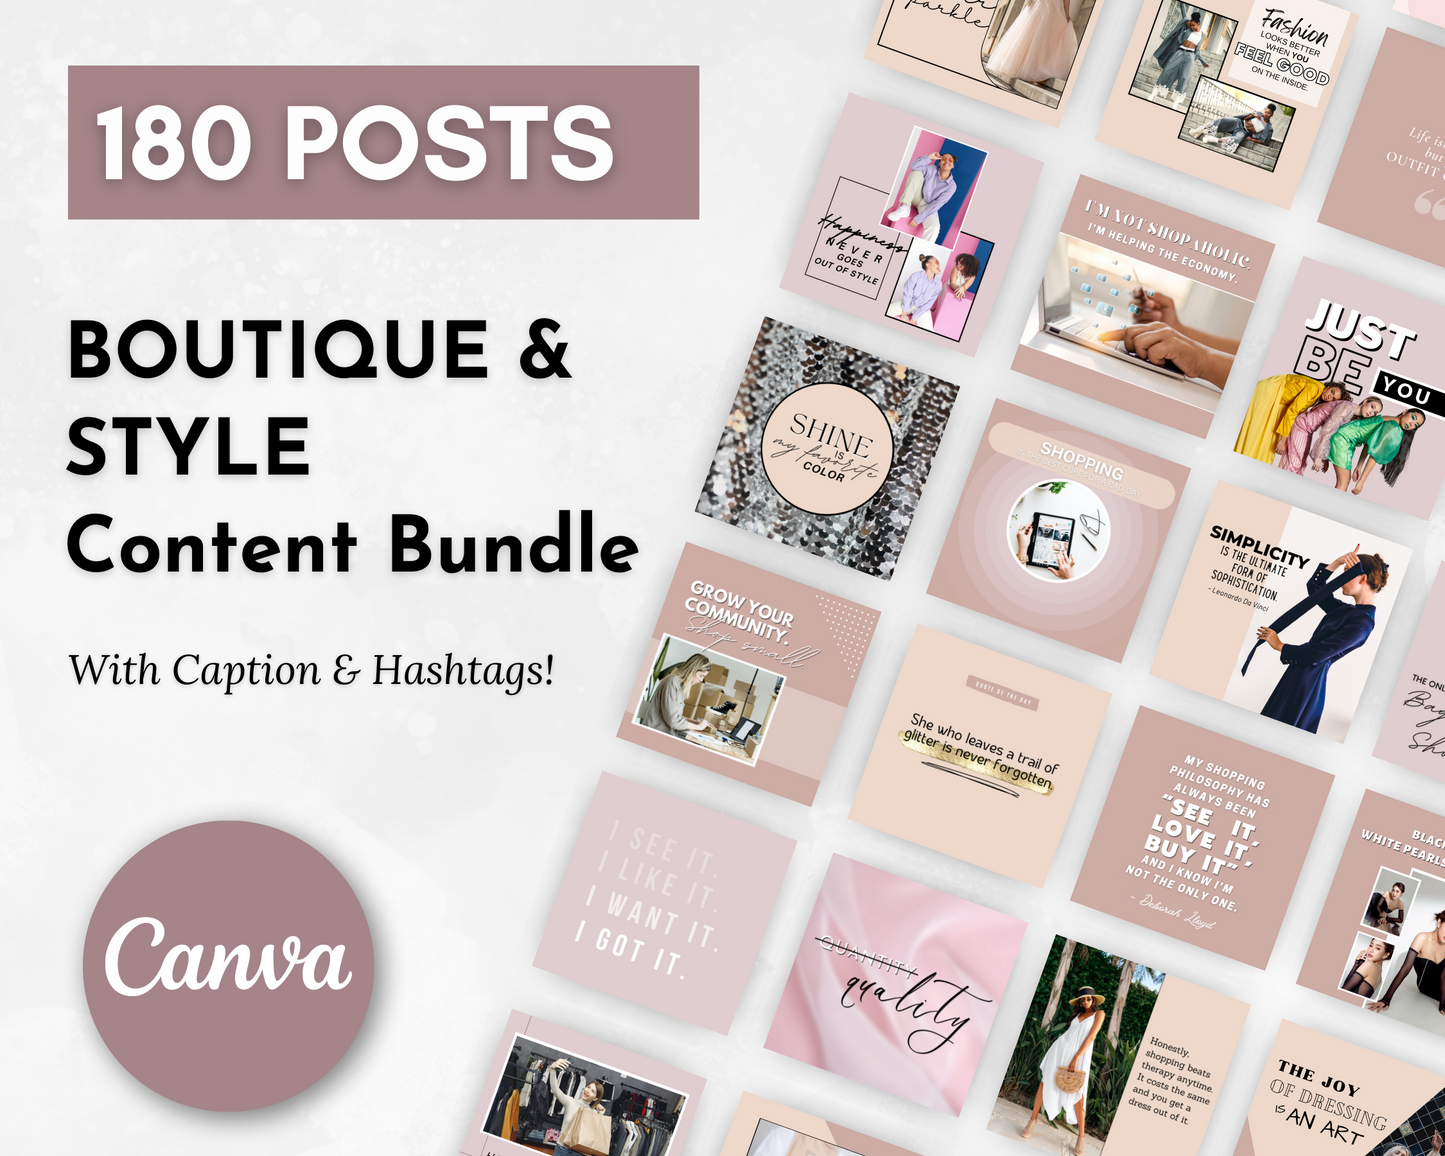 Boutique & Style Store Social Media Post Bundle with Canva Templates